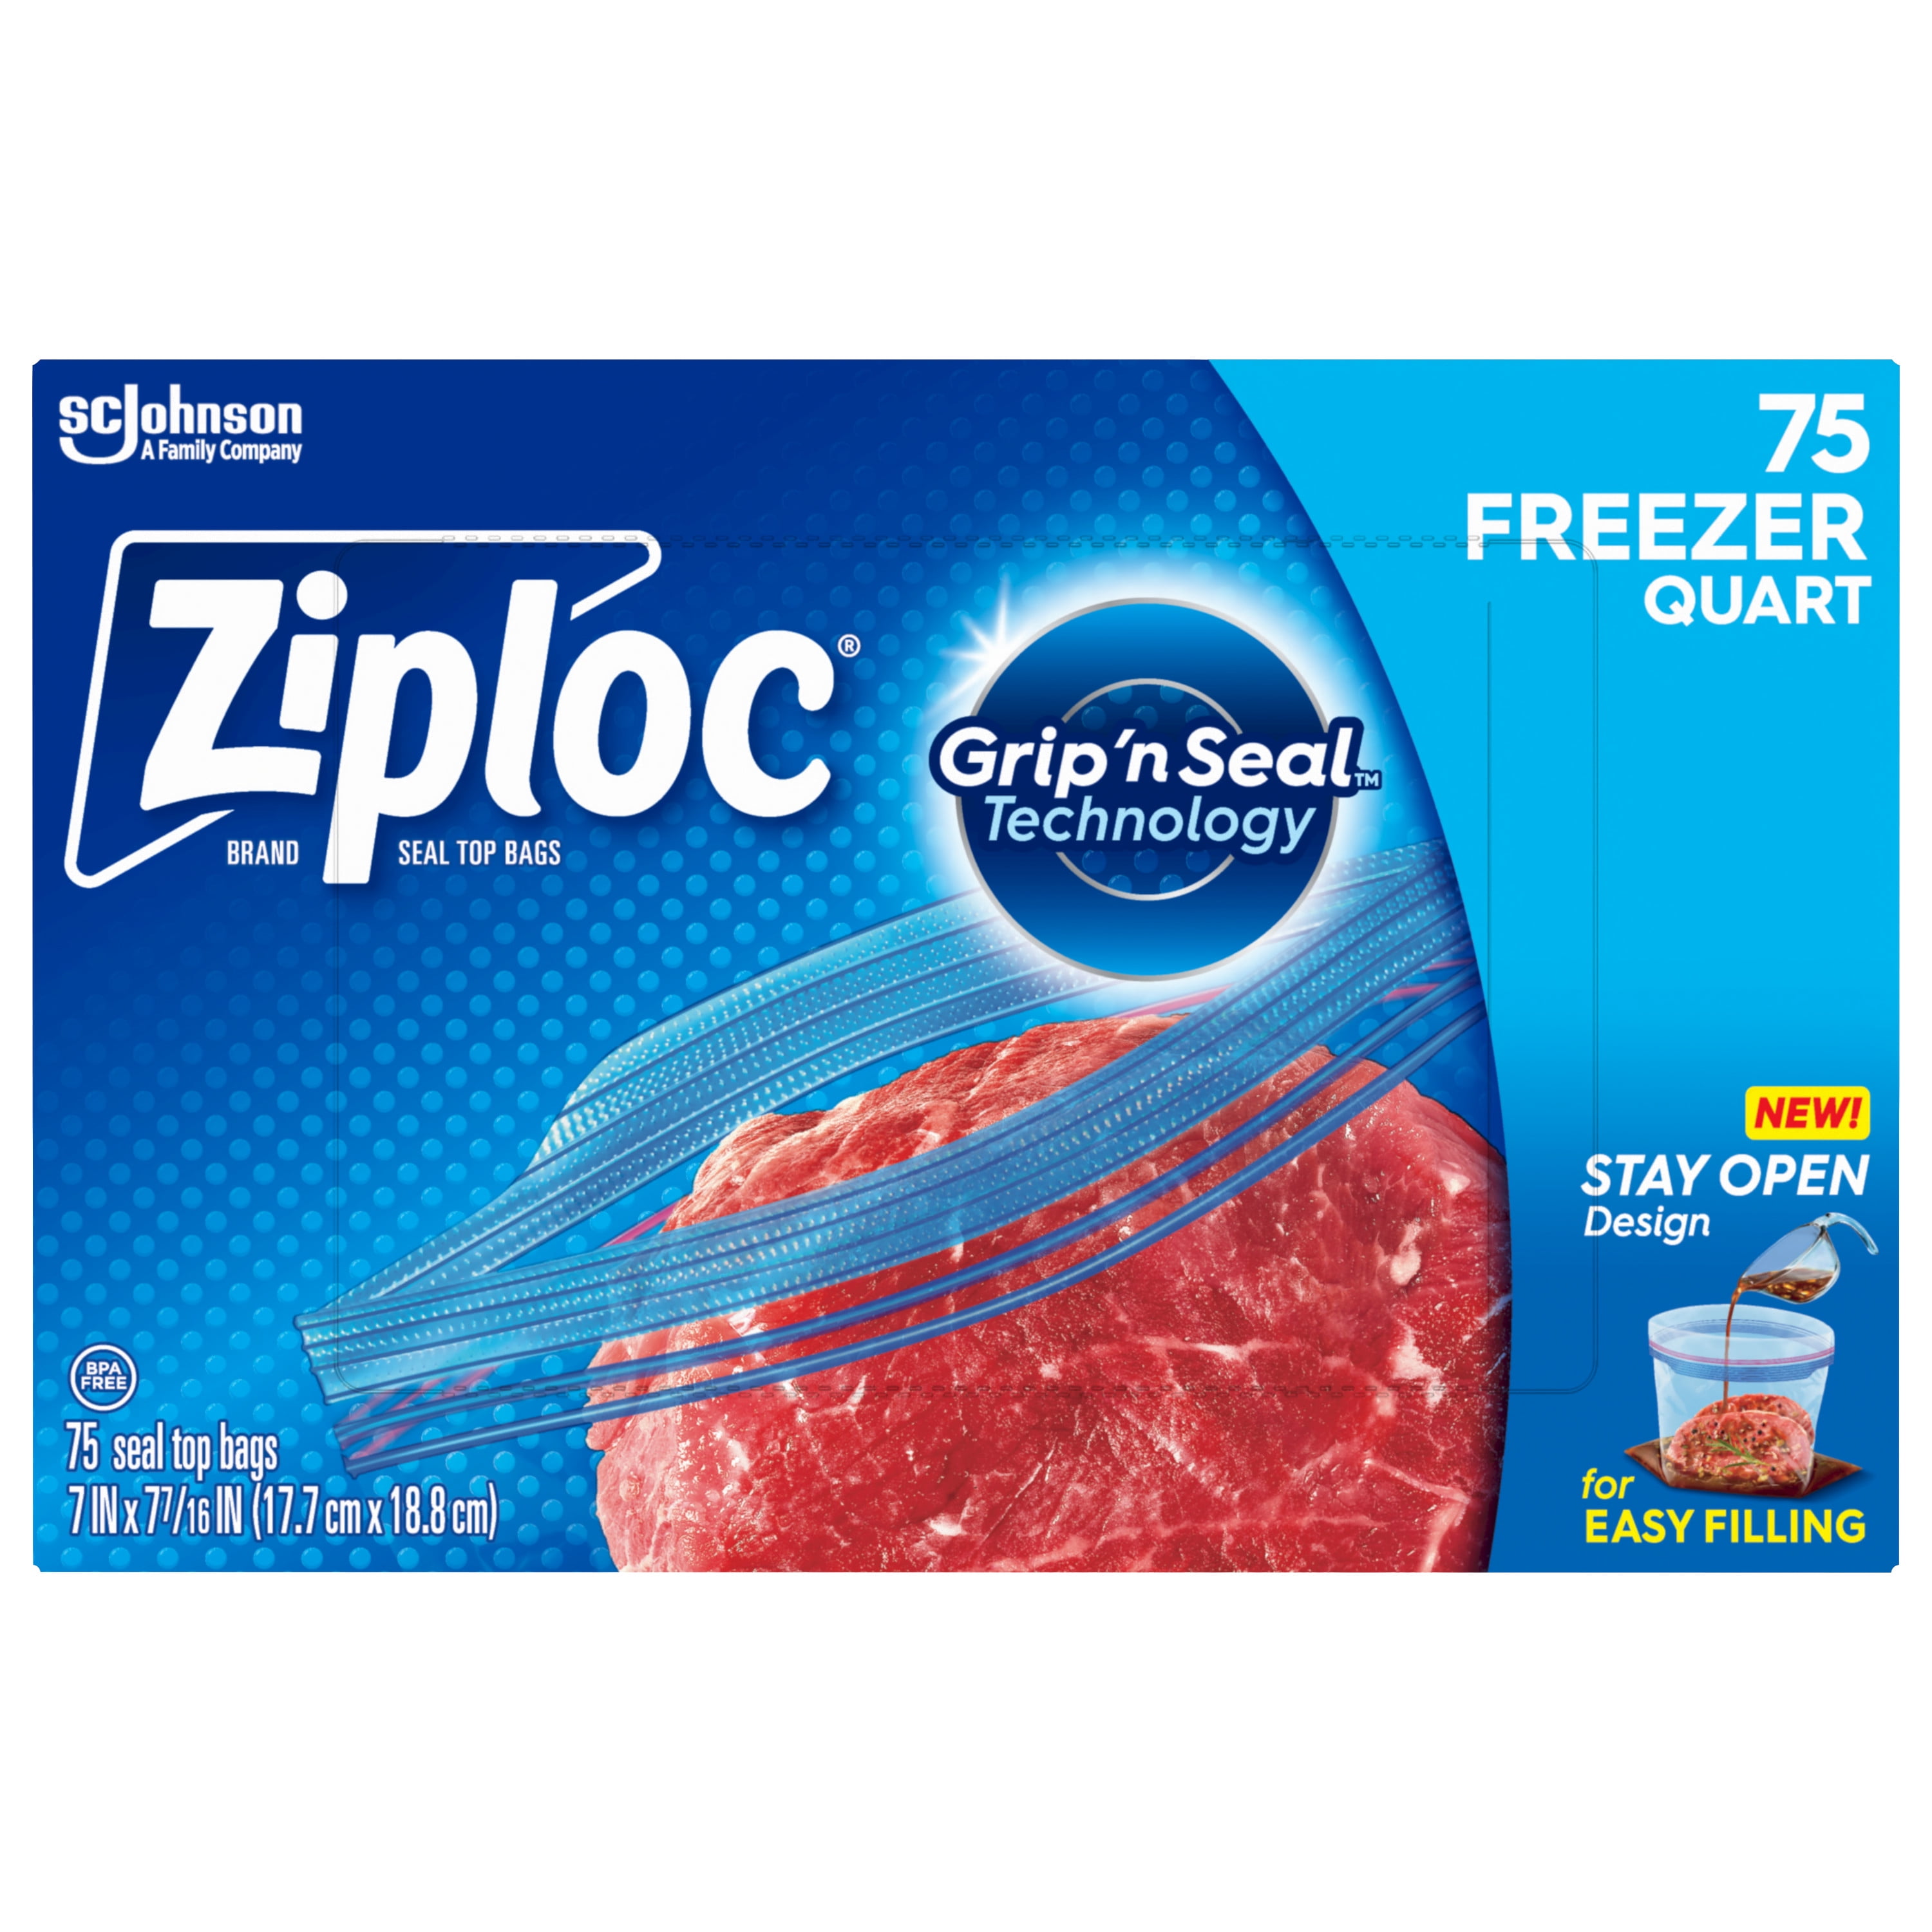 Ziploc® Brand Freezer Bags with New Stay Open Design, Quart, 75, Patented  Stand-up Bottom, Easy to Fill Freezer Bag, Unloc a Free Set of Hands in the